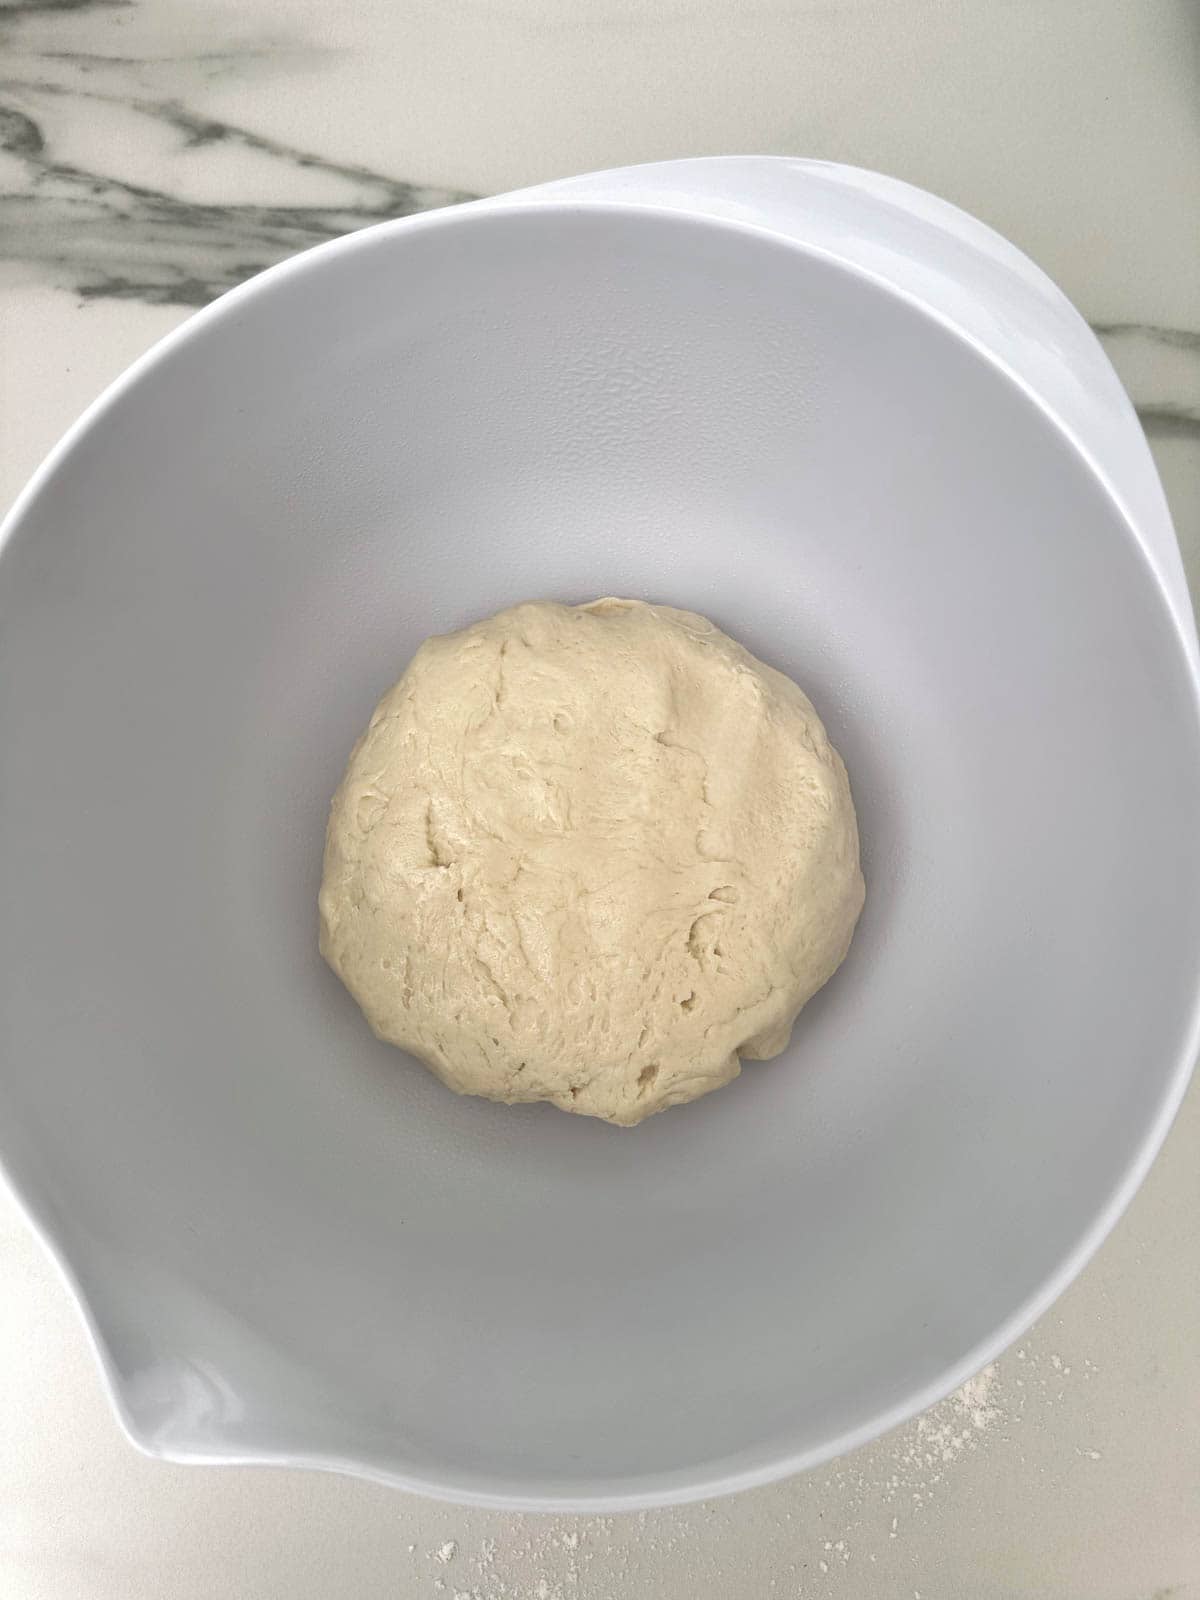 Thermomix dough in a bowl prior to proofing. 